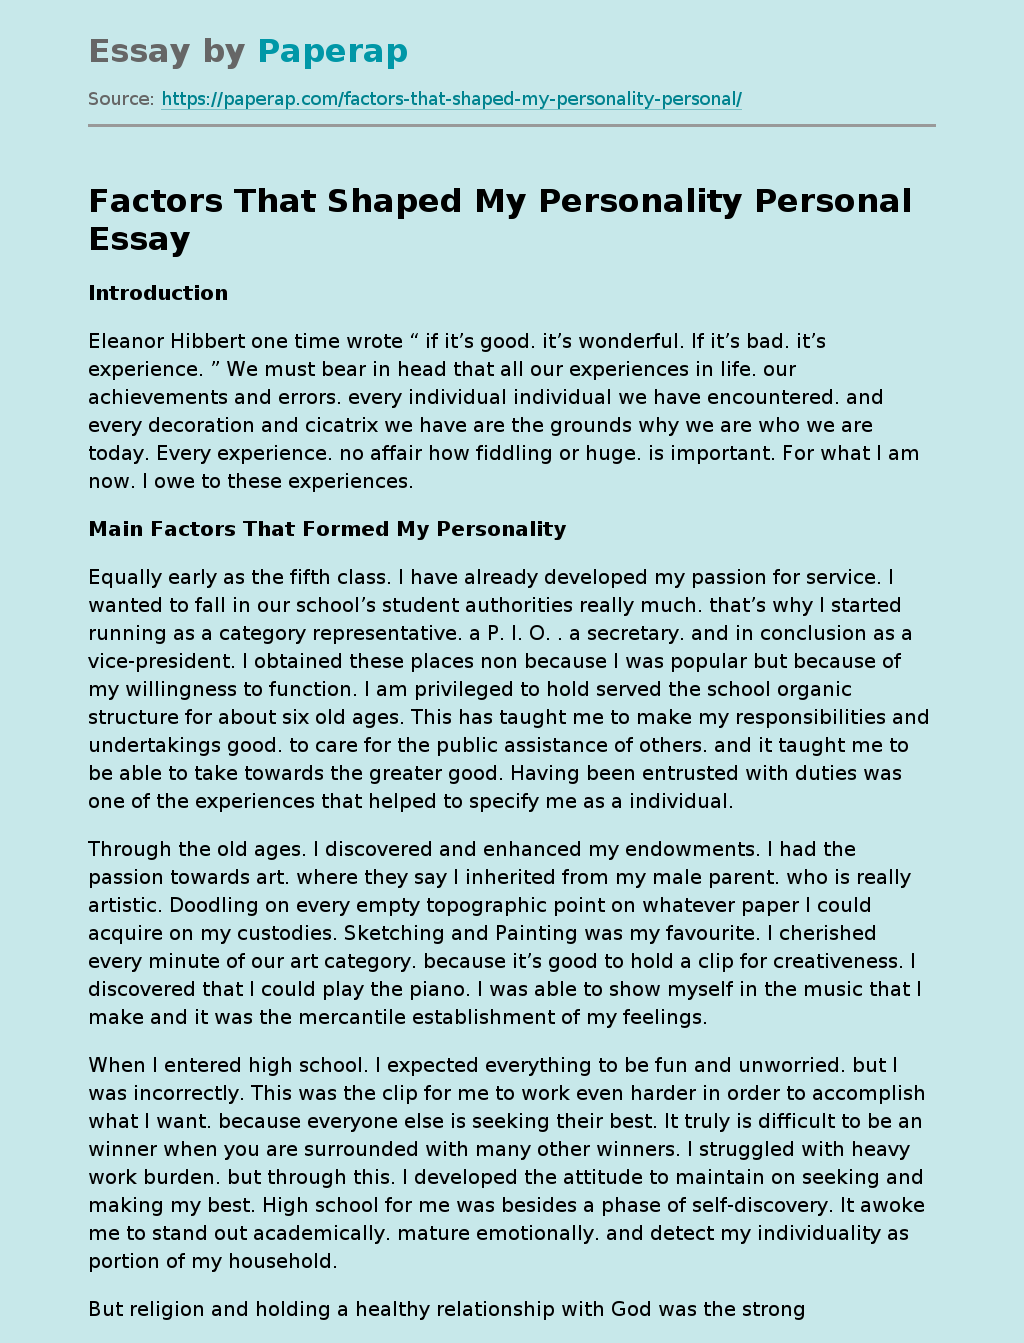 Factors That Shaped My Personality Personal